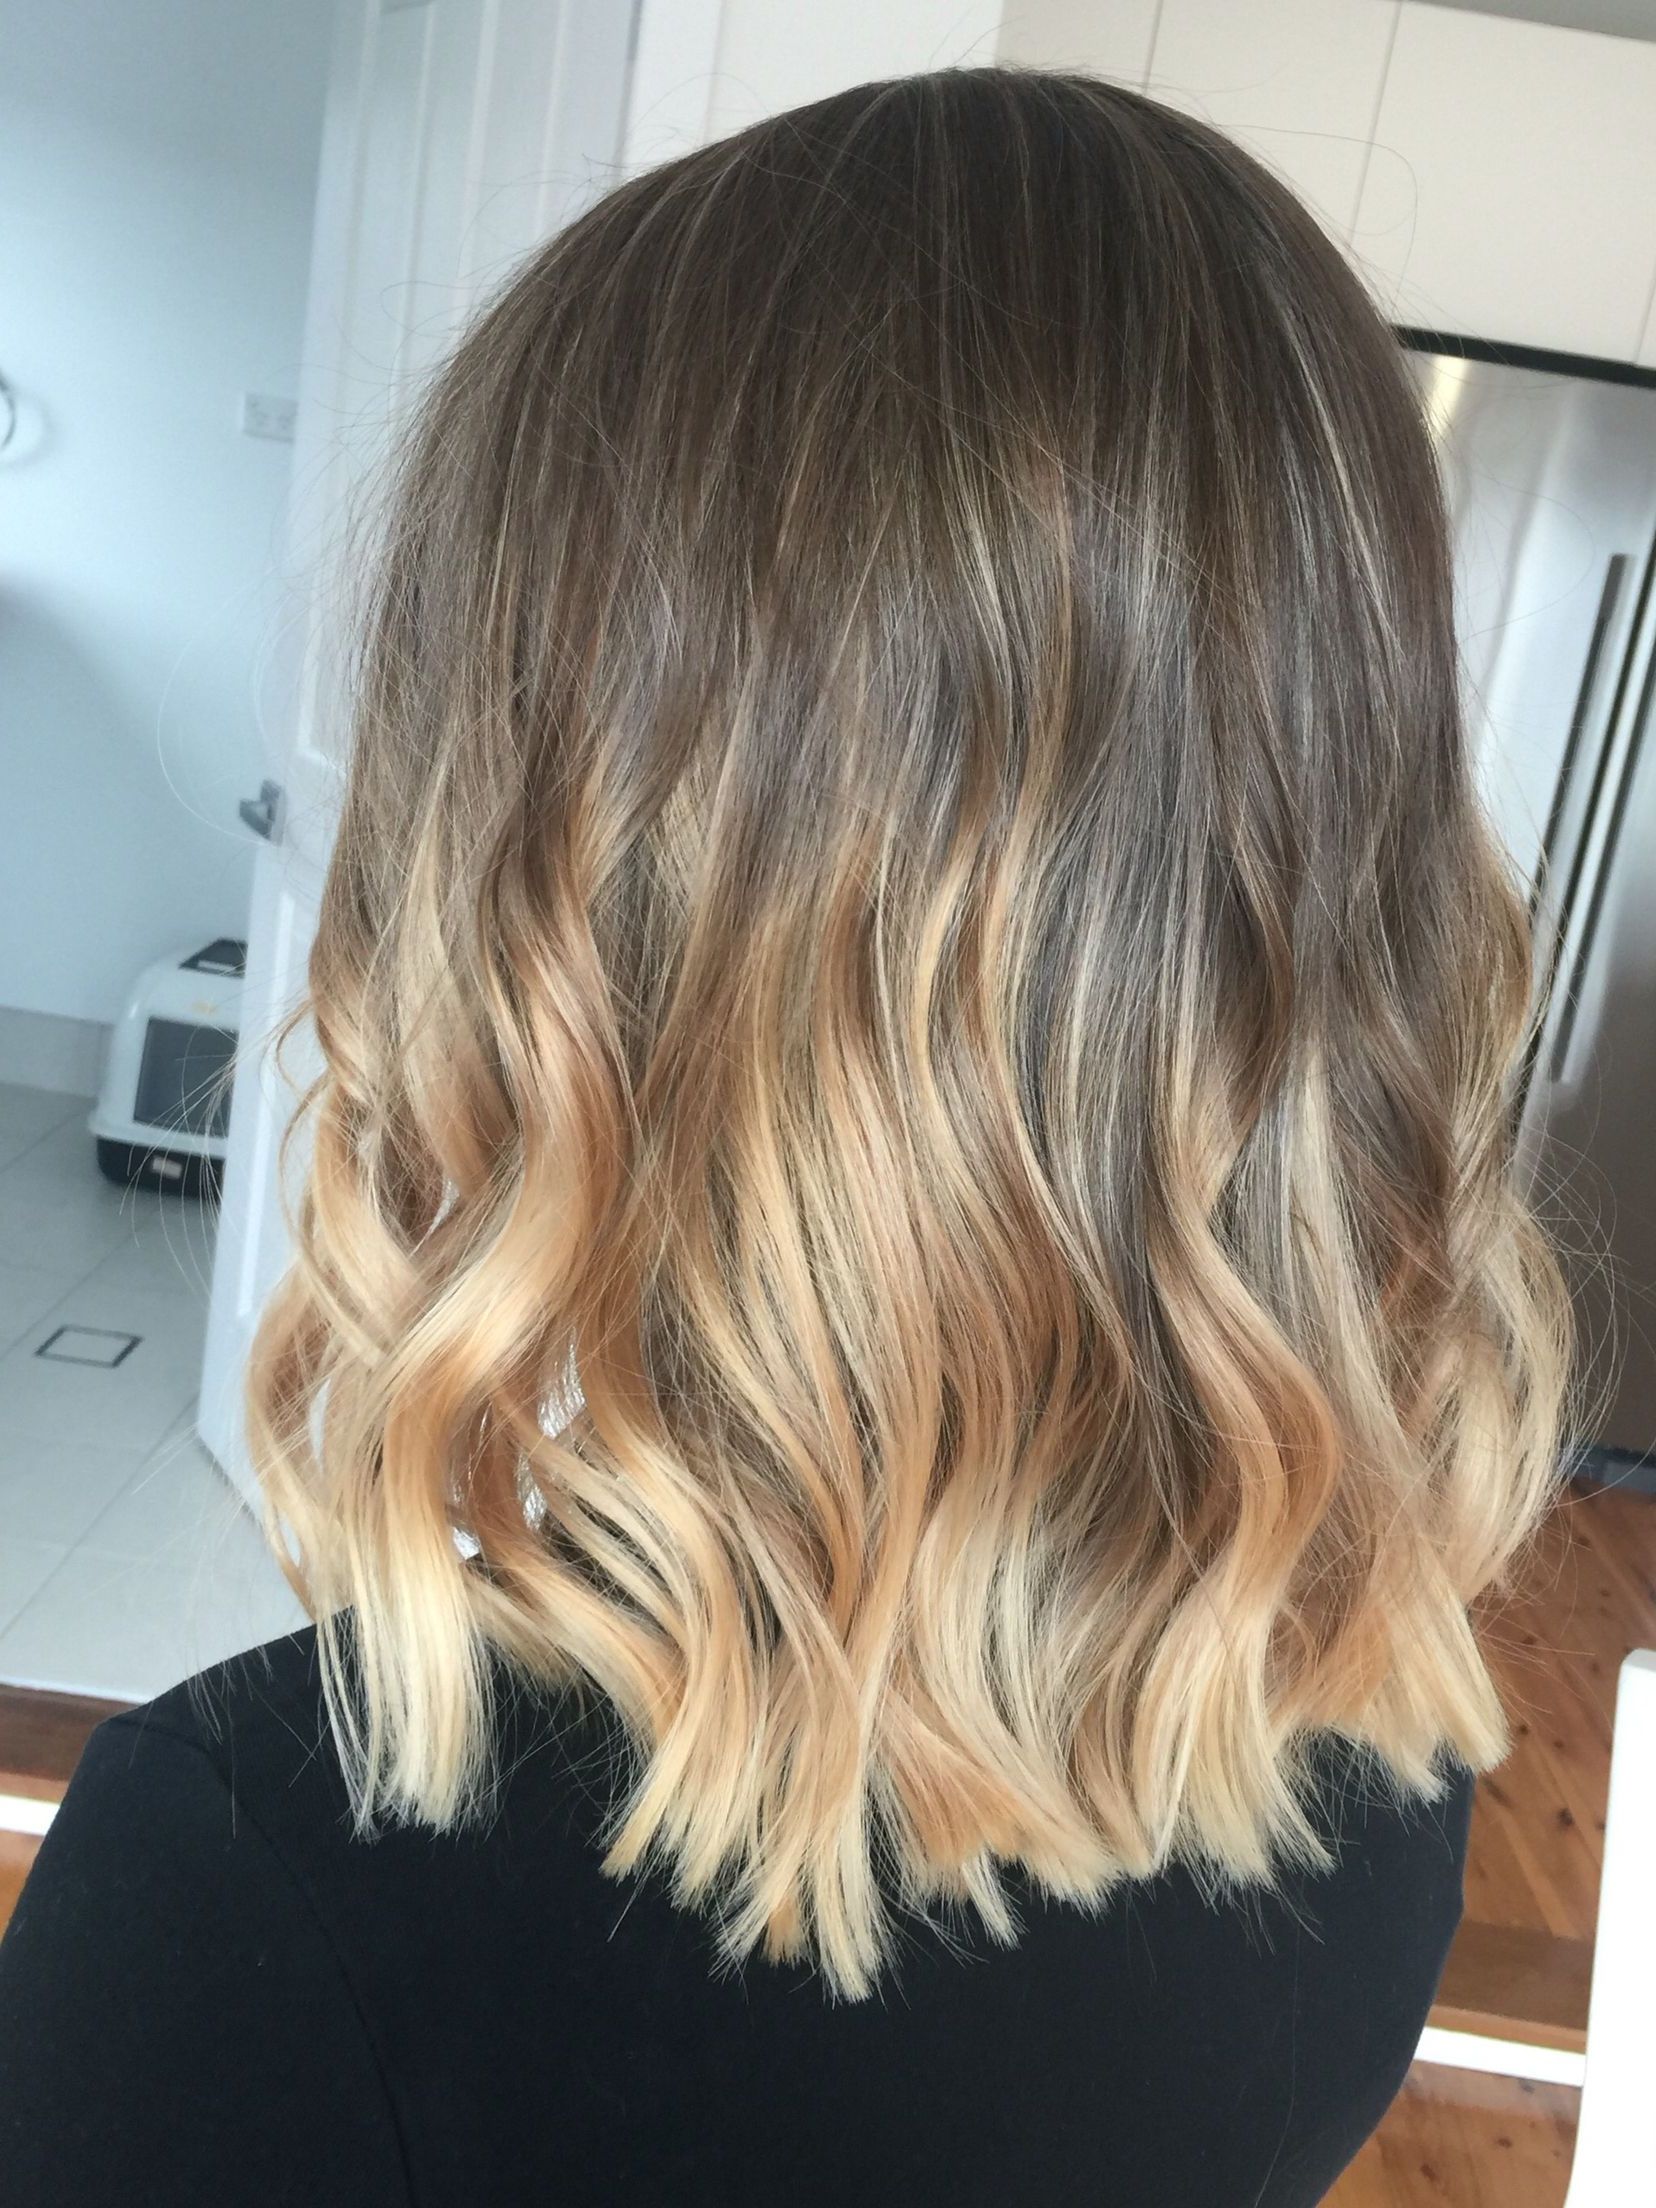 Trendy Blonde And Brunette Hairstyles Inside Lived In Hair Colour Blonde Brunette Golden Tones Balayage Face (View 10 of 20)